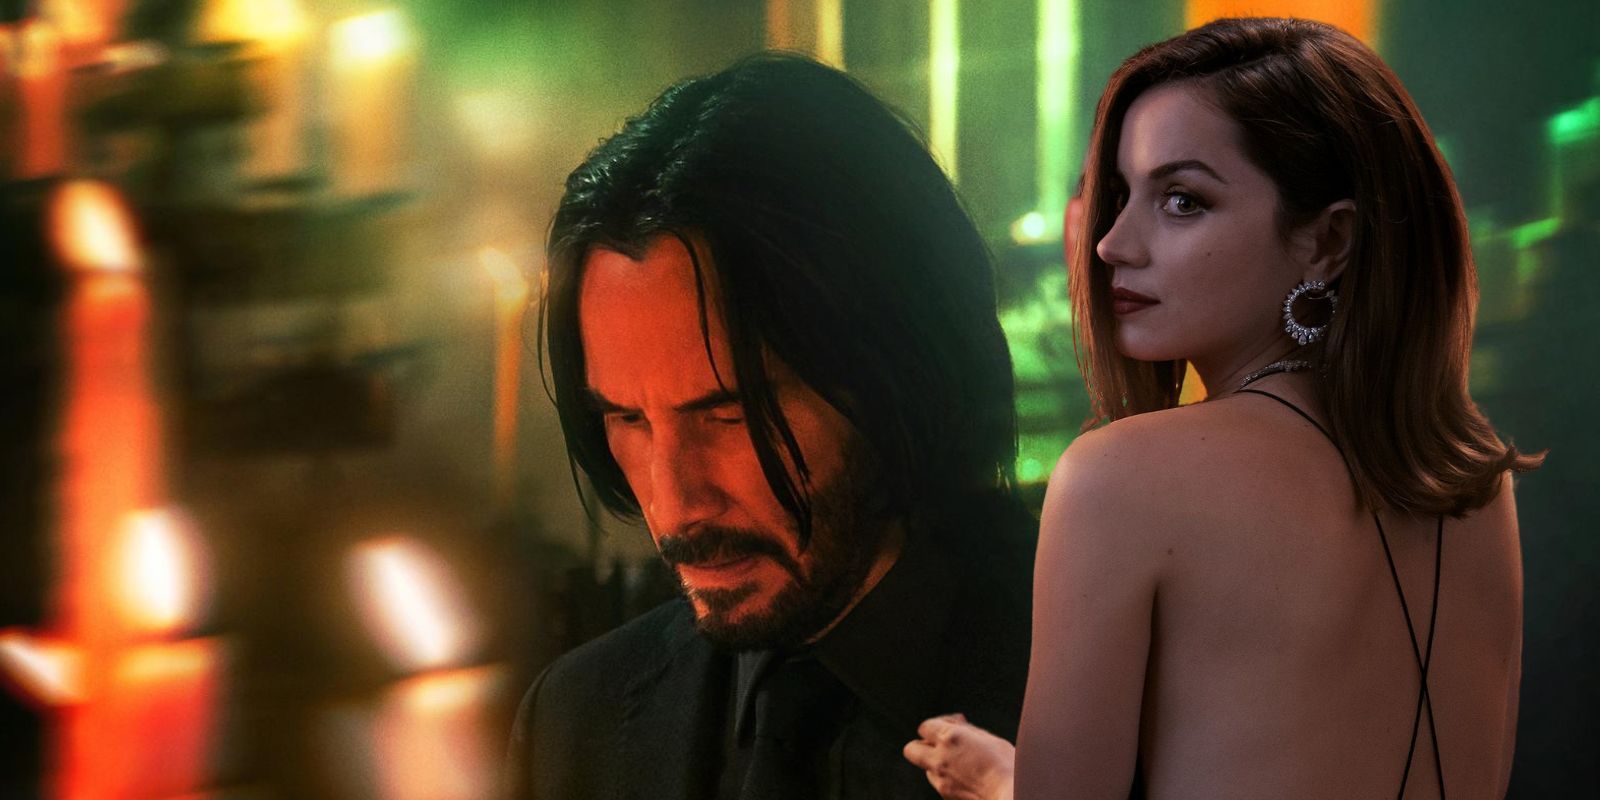 Ana de Armas and Keanu Reeves to star in John Wick Spinoff Ballerina